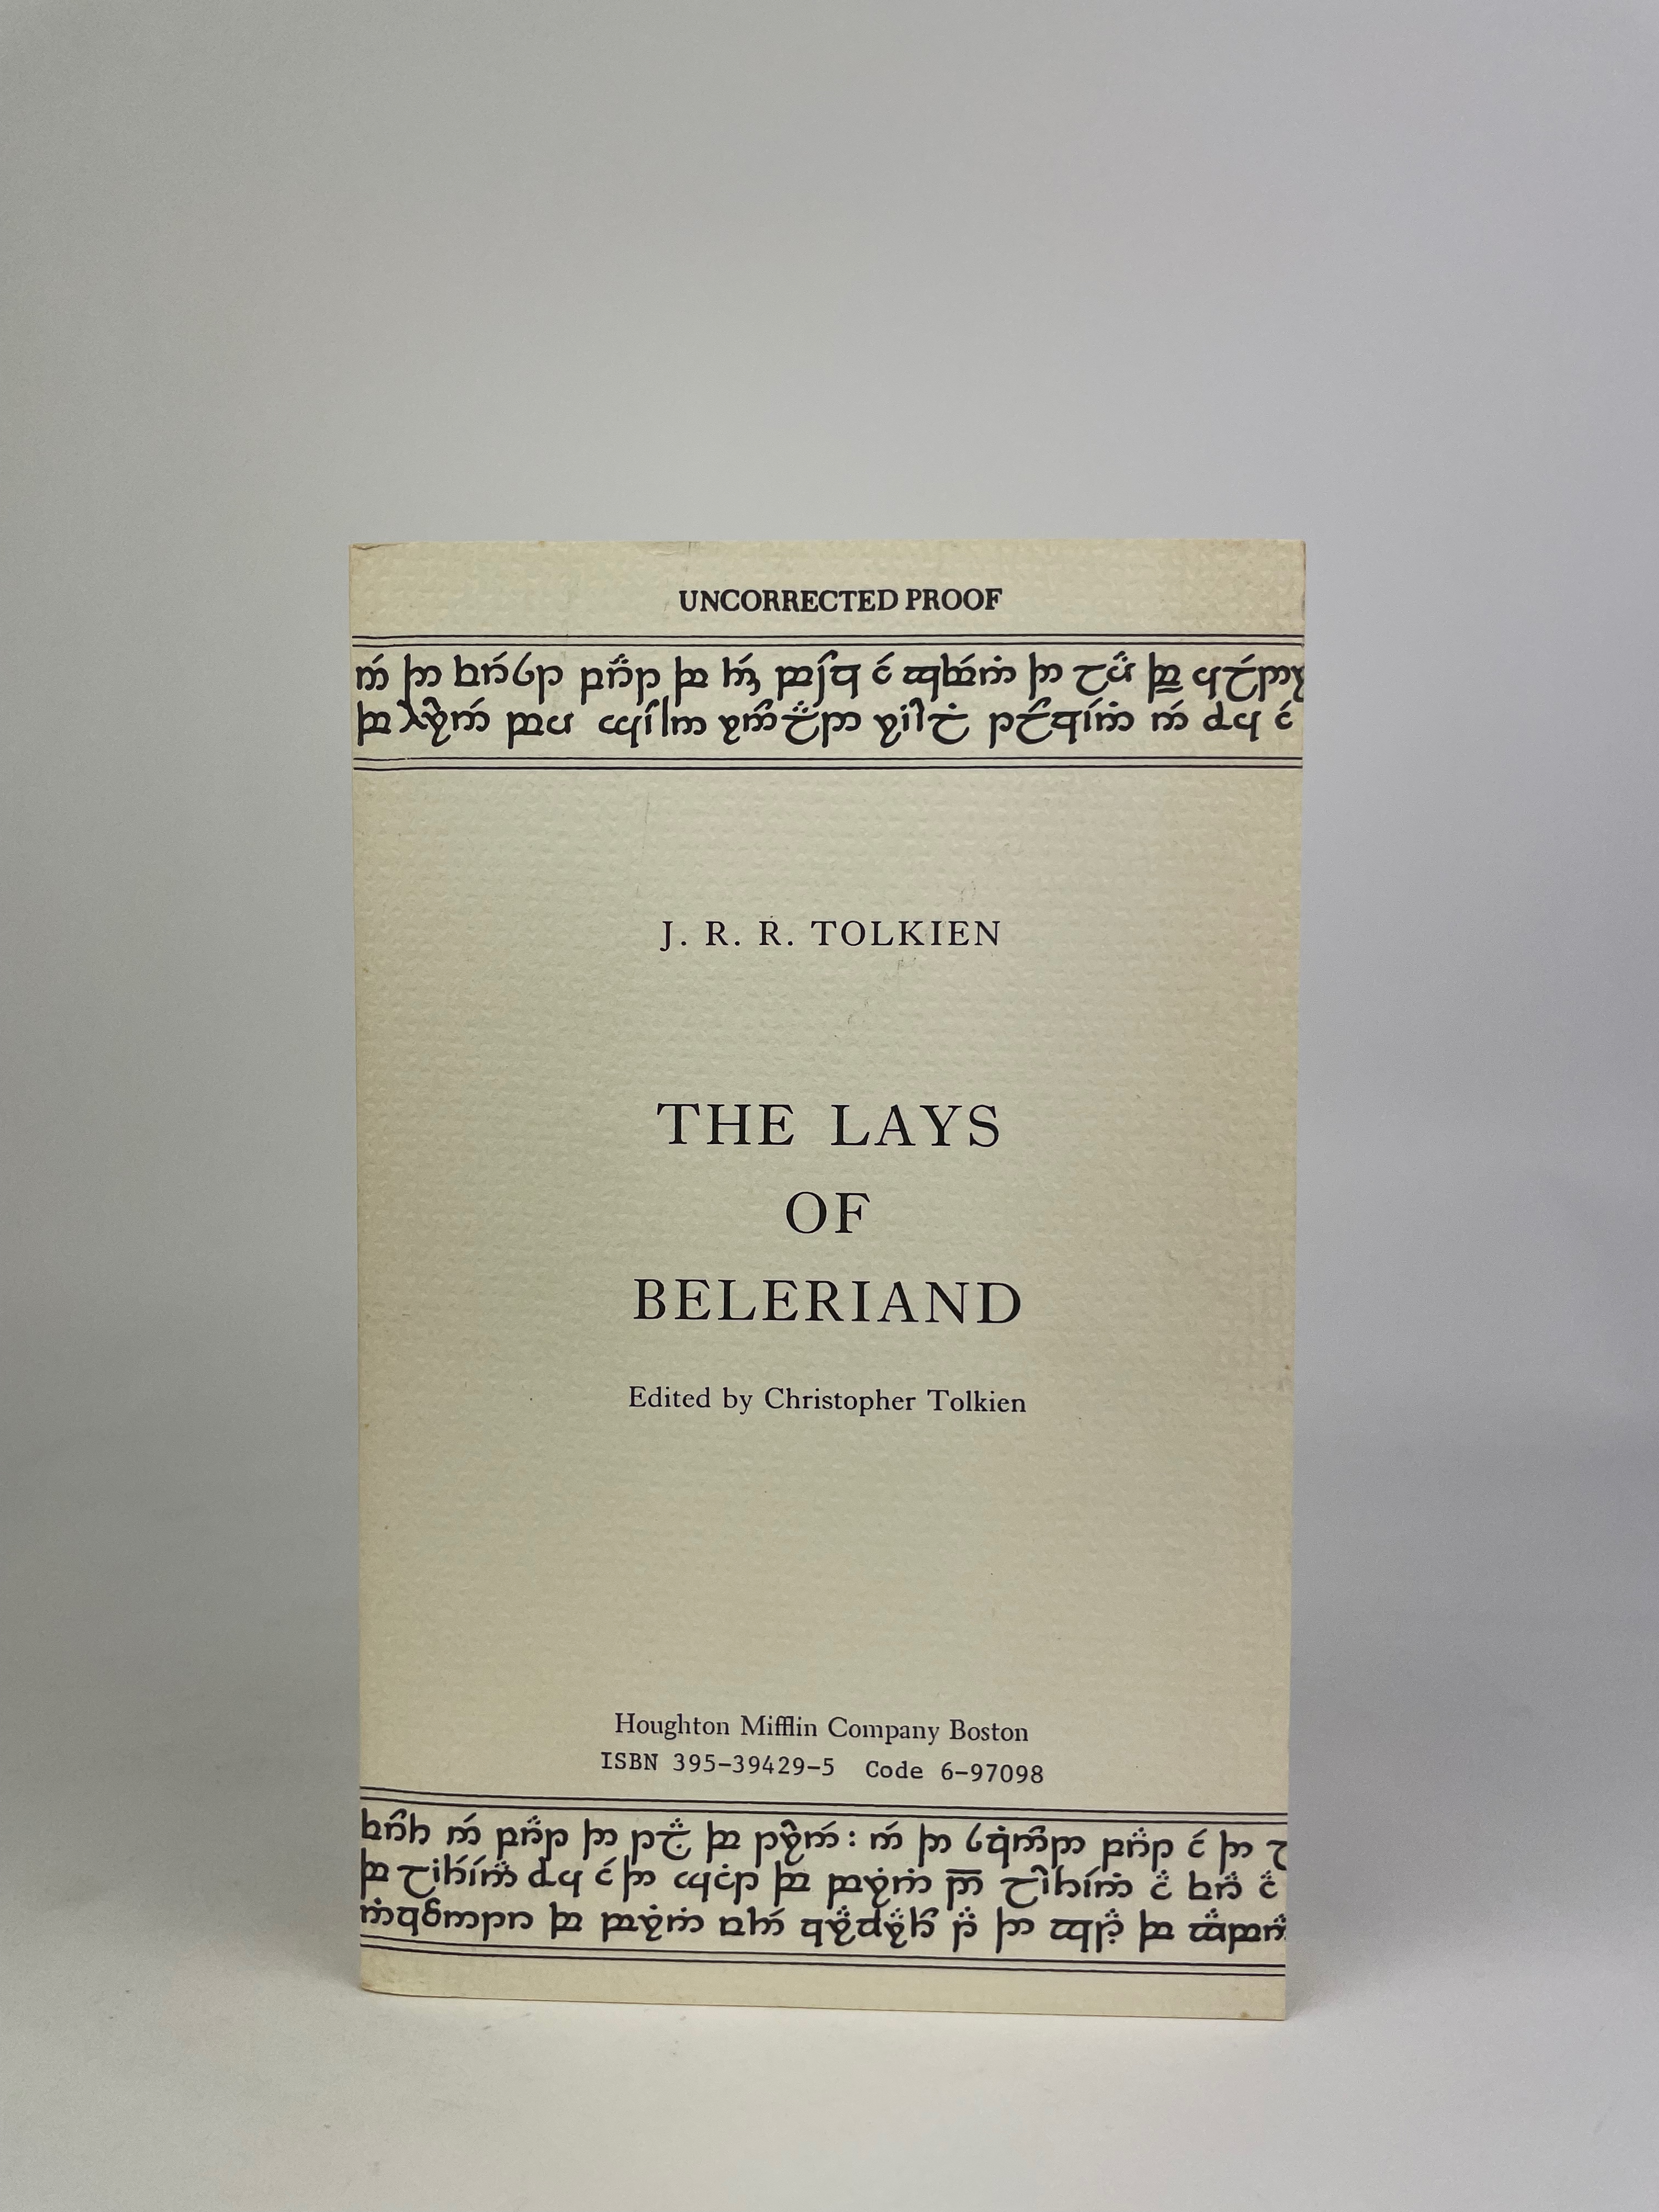 Advance Uncorrected Proof of The Lays of Beleriand (Book of Lost Tales III) edited by Christoper Tolkien